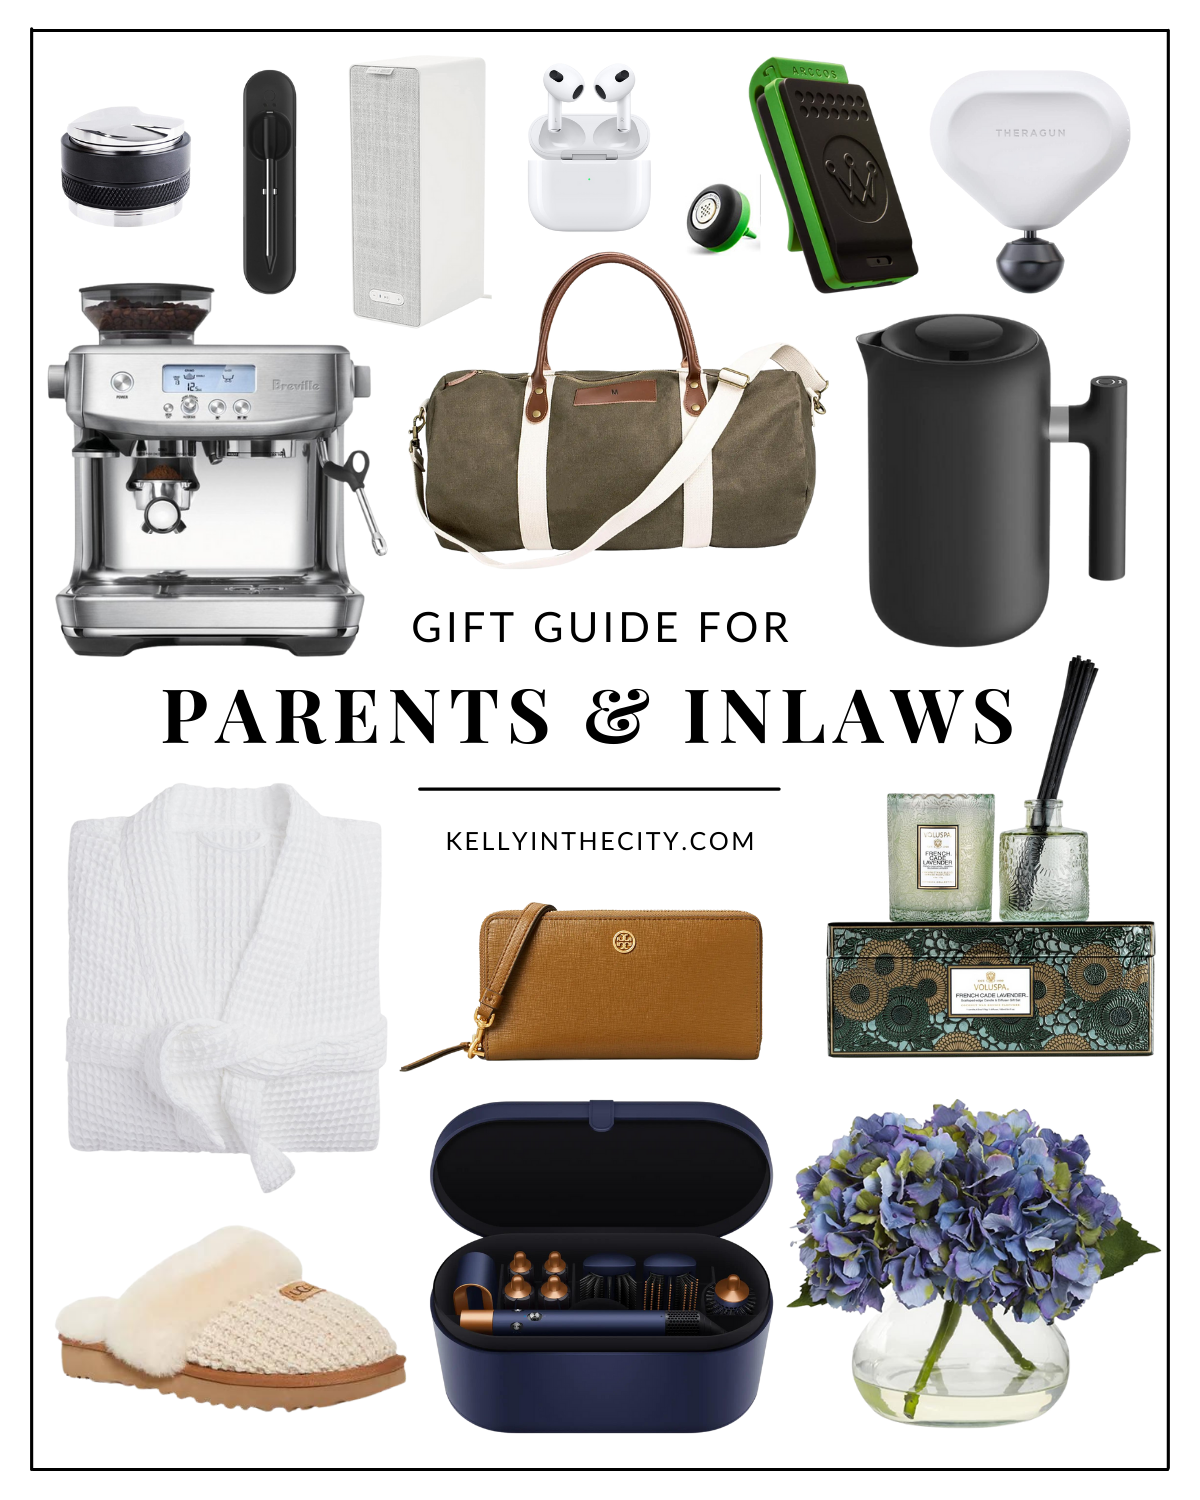 Gift Guide For Parents and In-Laws